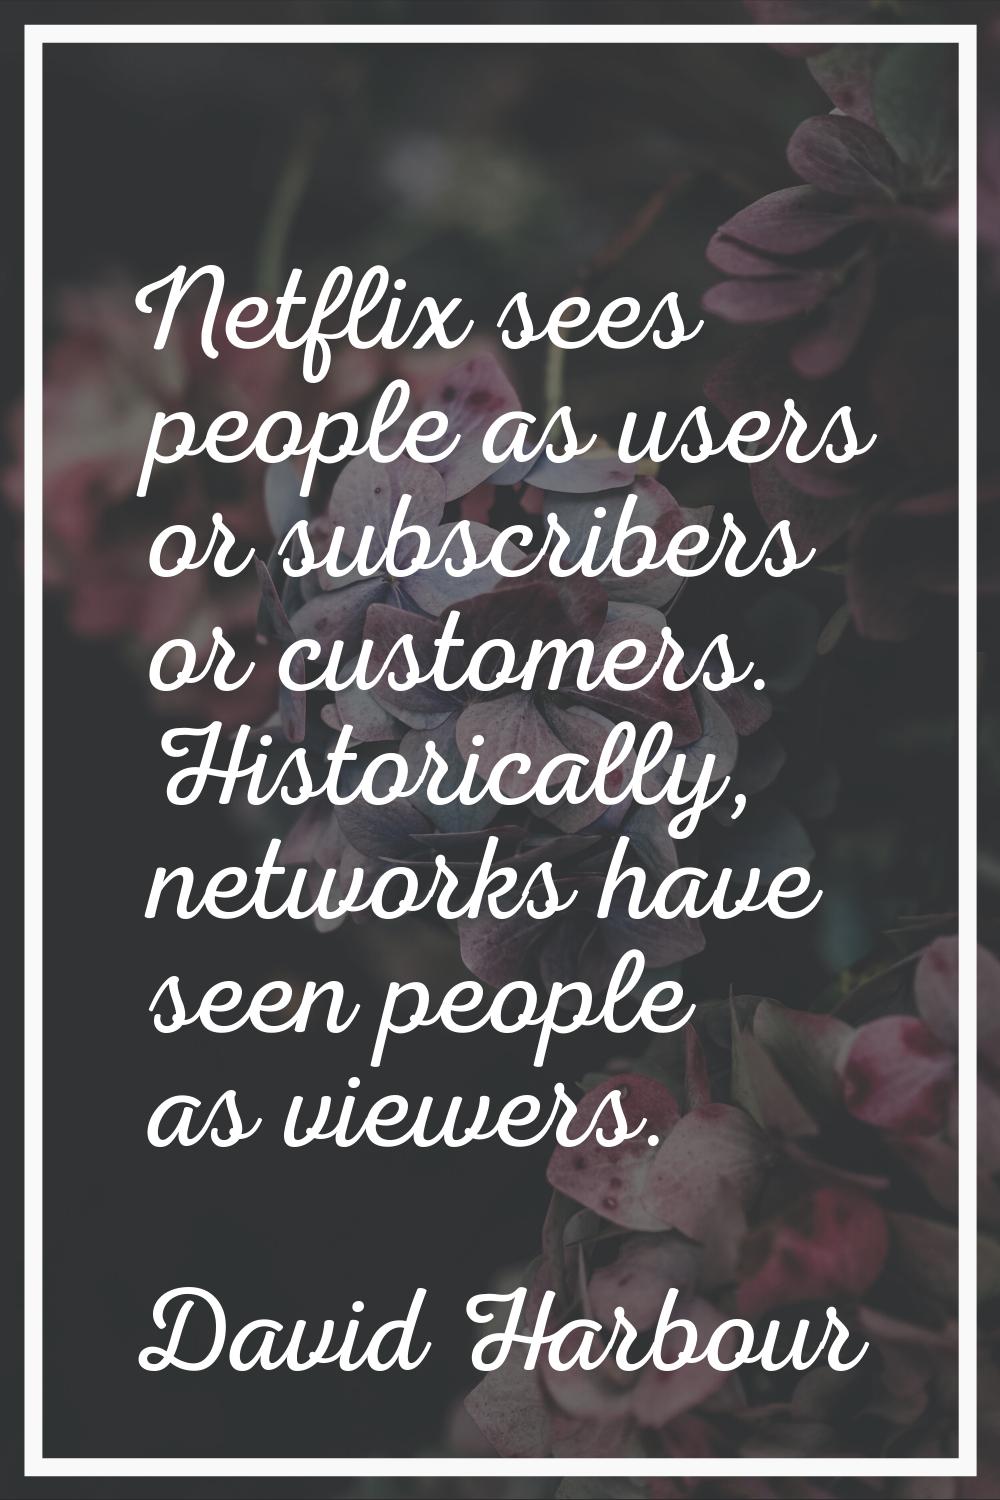 Netflix sees people as users or subscribers or customers. Historically, networks have seen people a